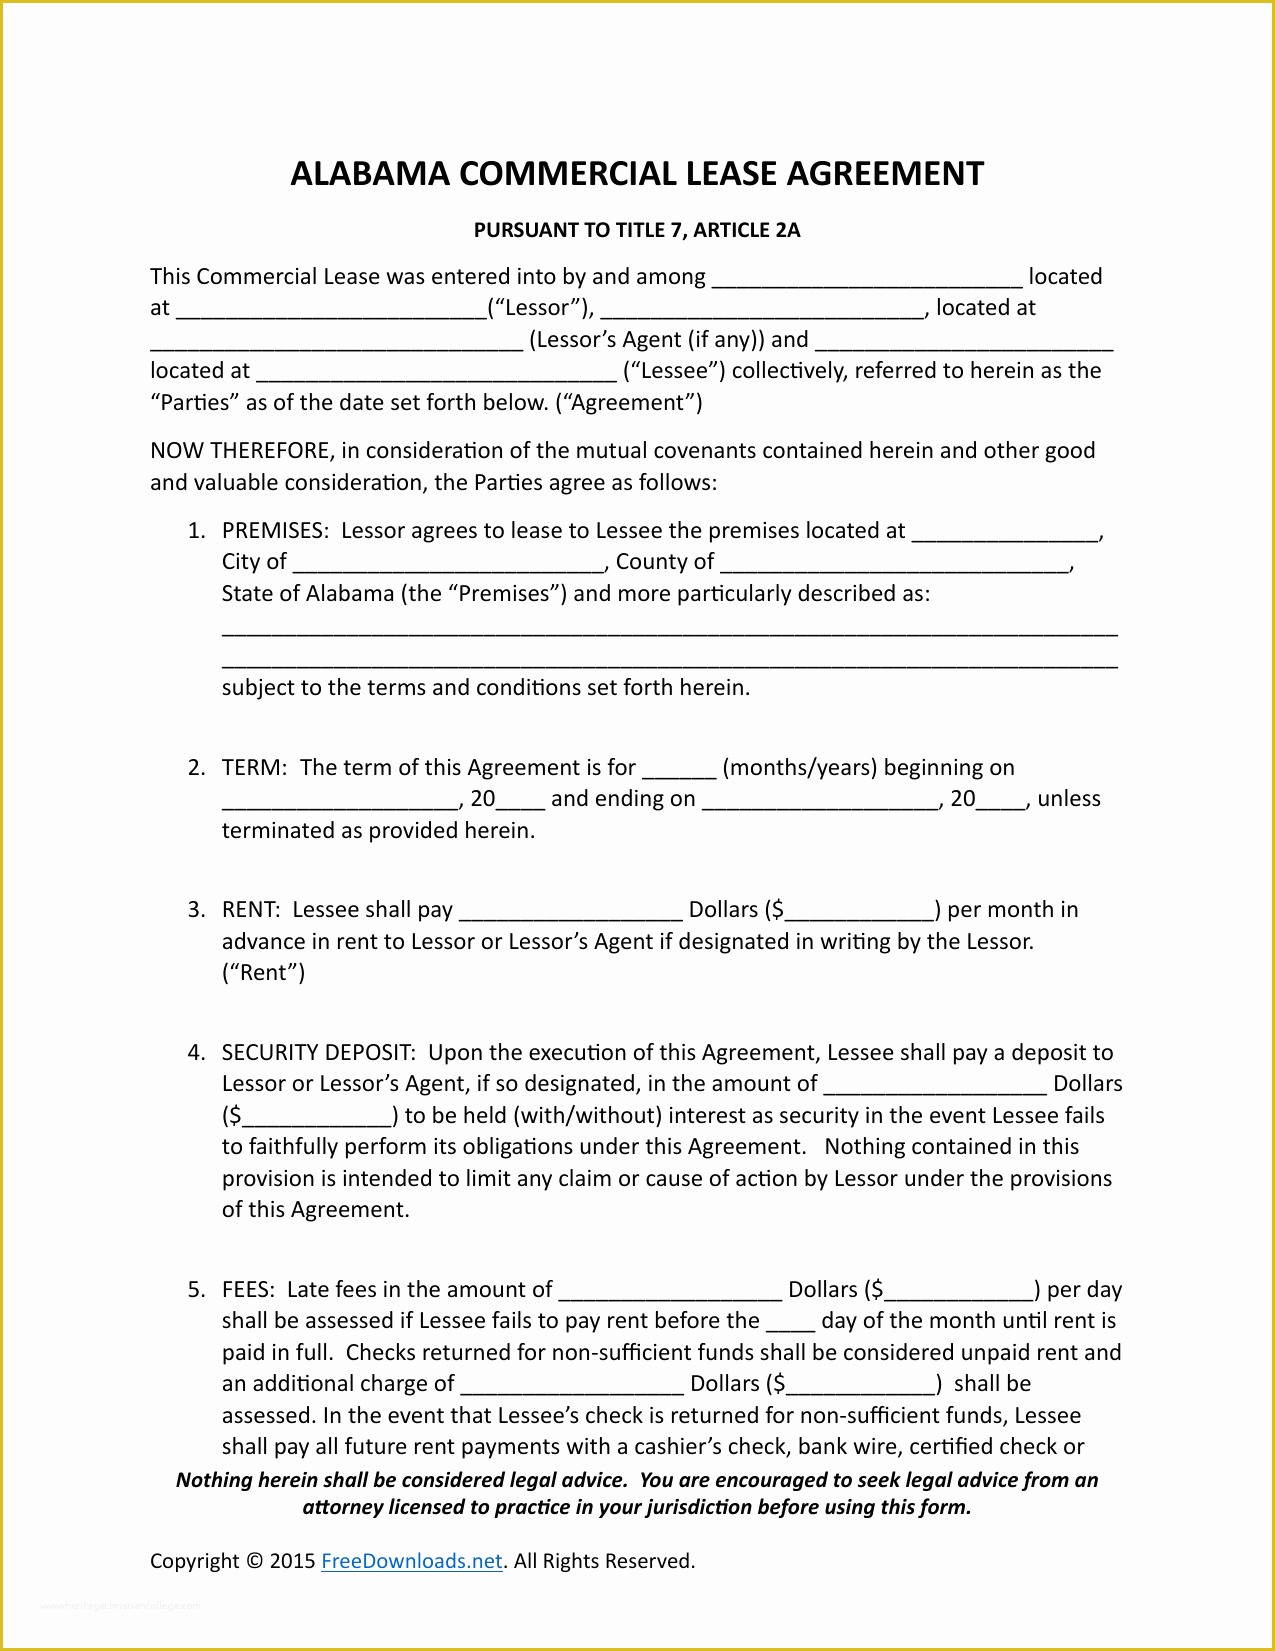 Free Commercial Lease Agreement Template Download Of Download Alabama Mercial Lease Agreement Template